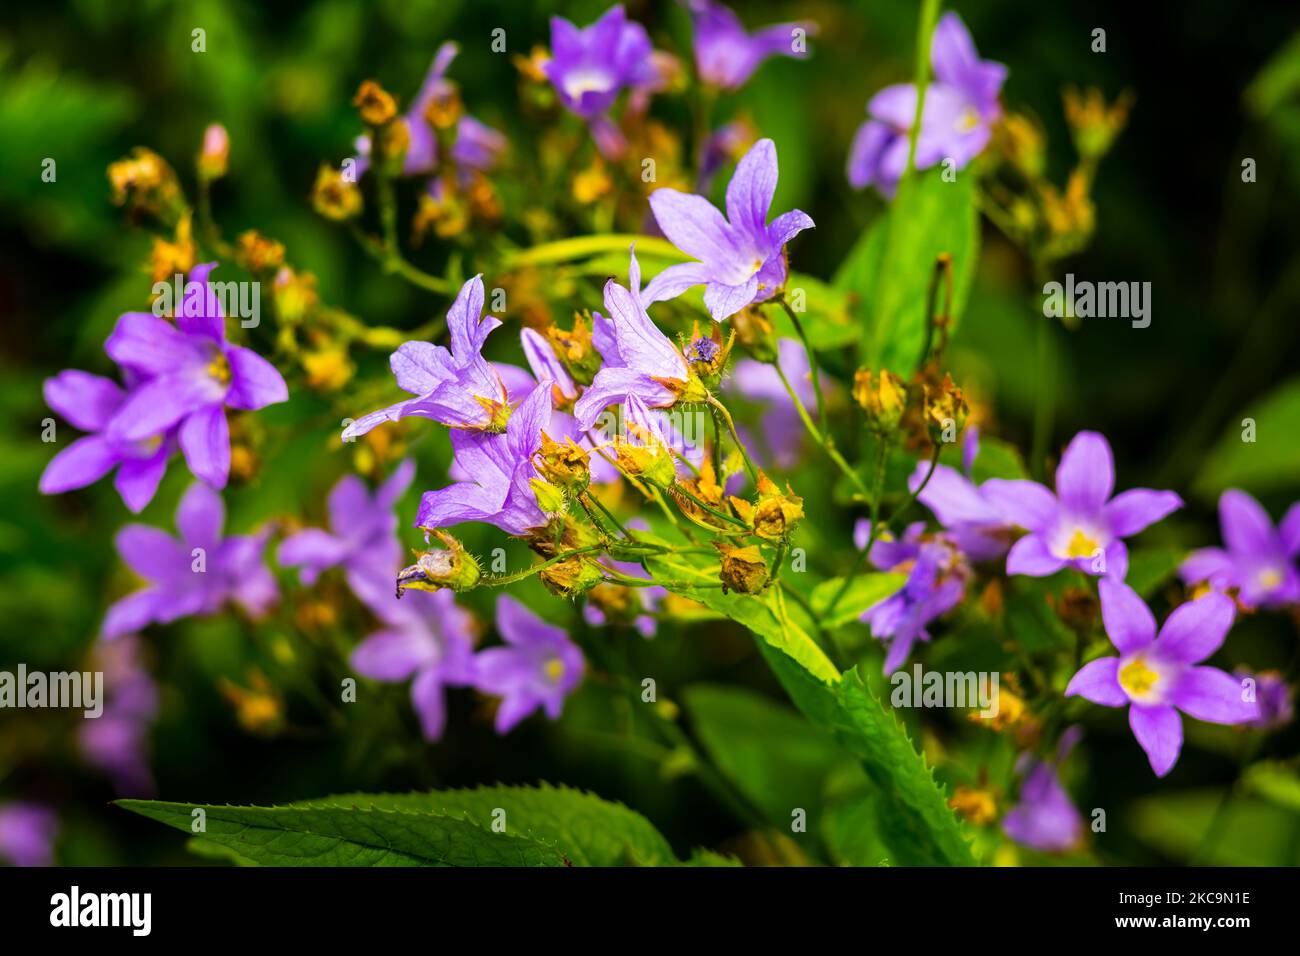 The beautiful spreading bellflowers on a natural blurred background Stock Photo